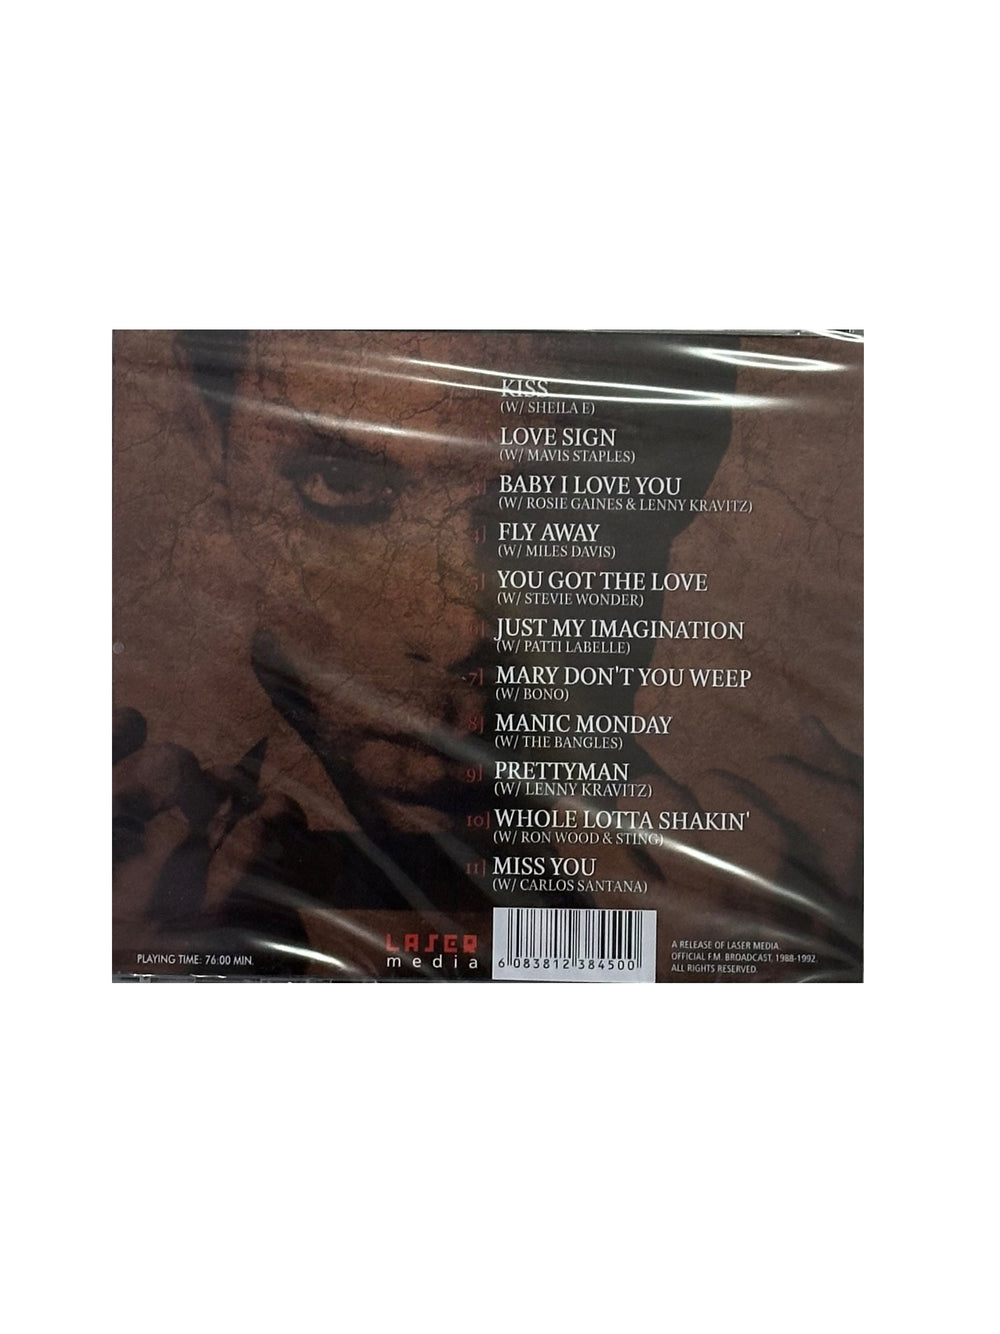 Prince – & Friends CD Album Licence Approved NEW: